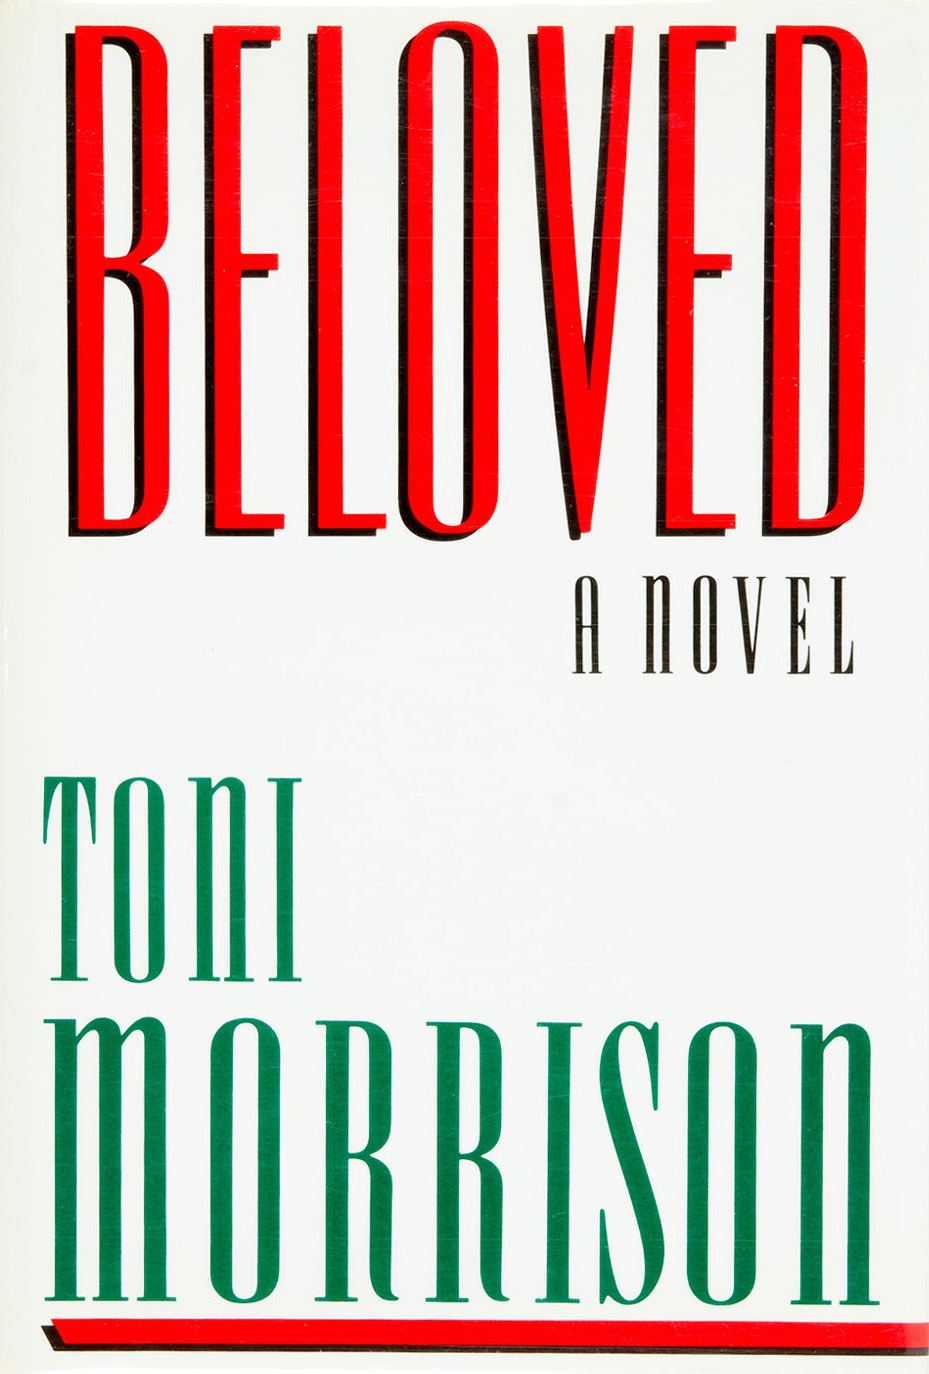 Image of book cover "Beloved" by Toni Morrison